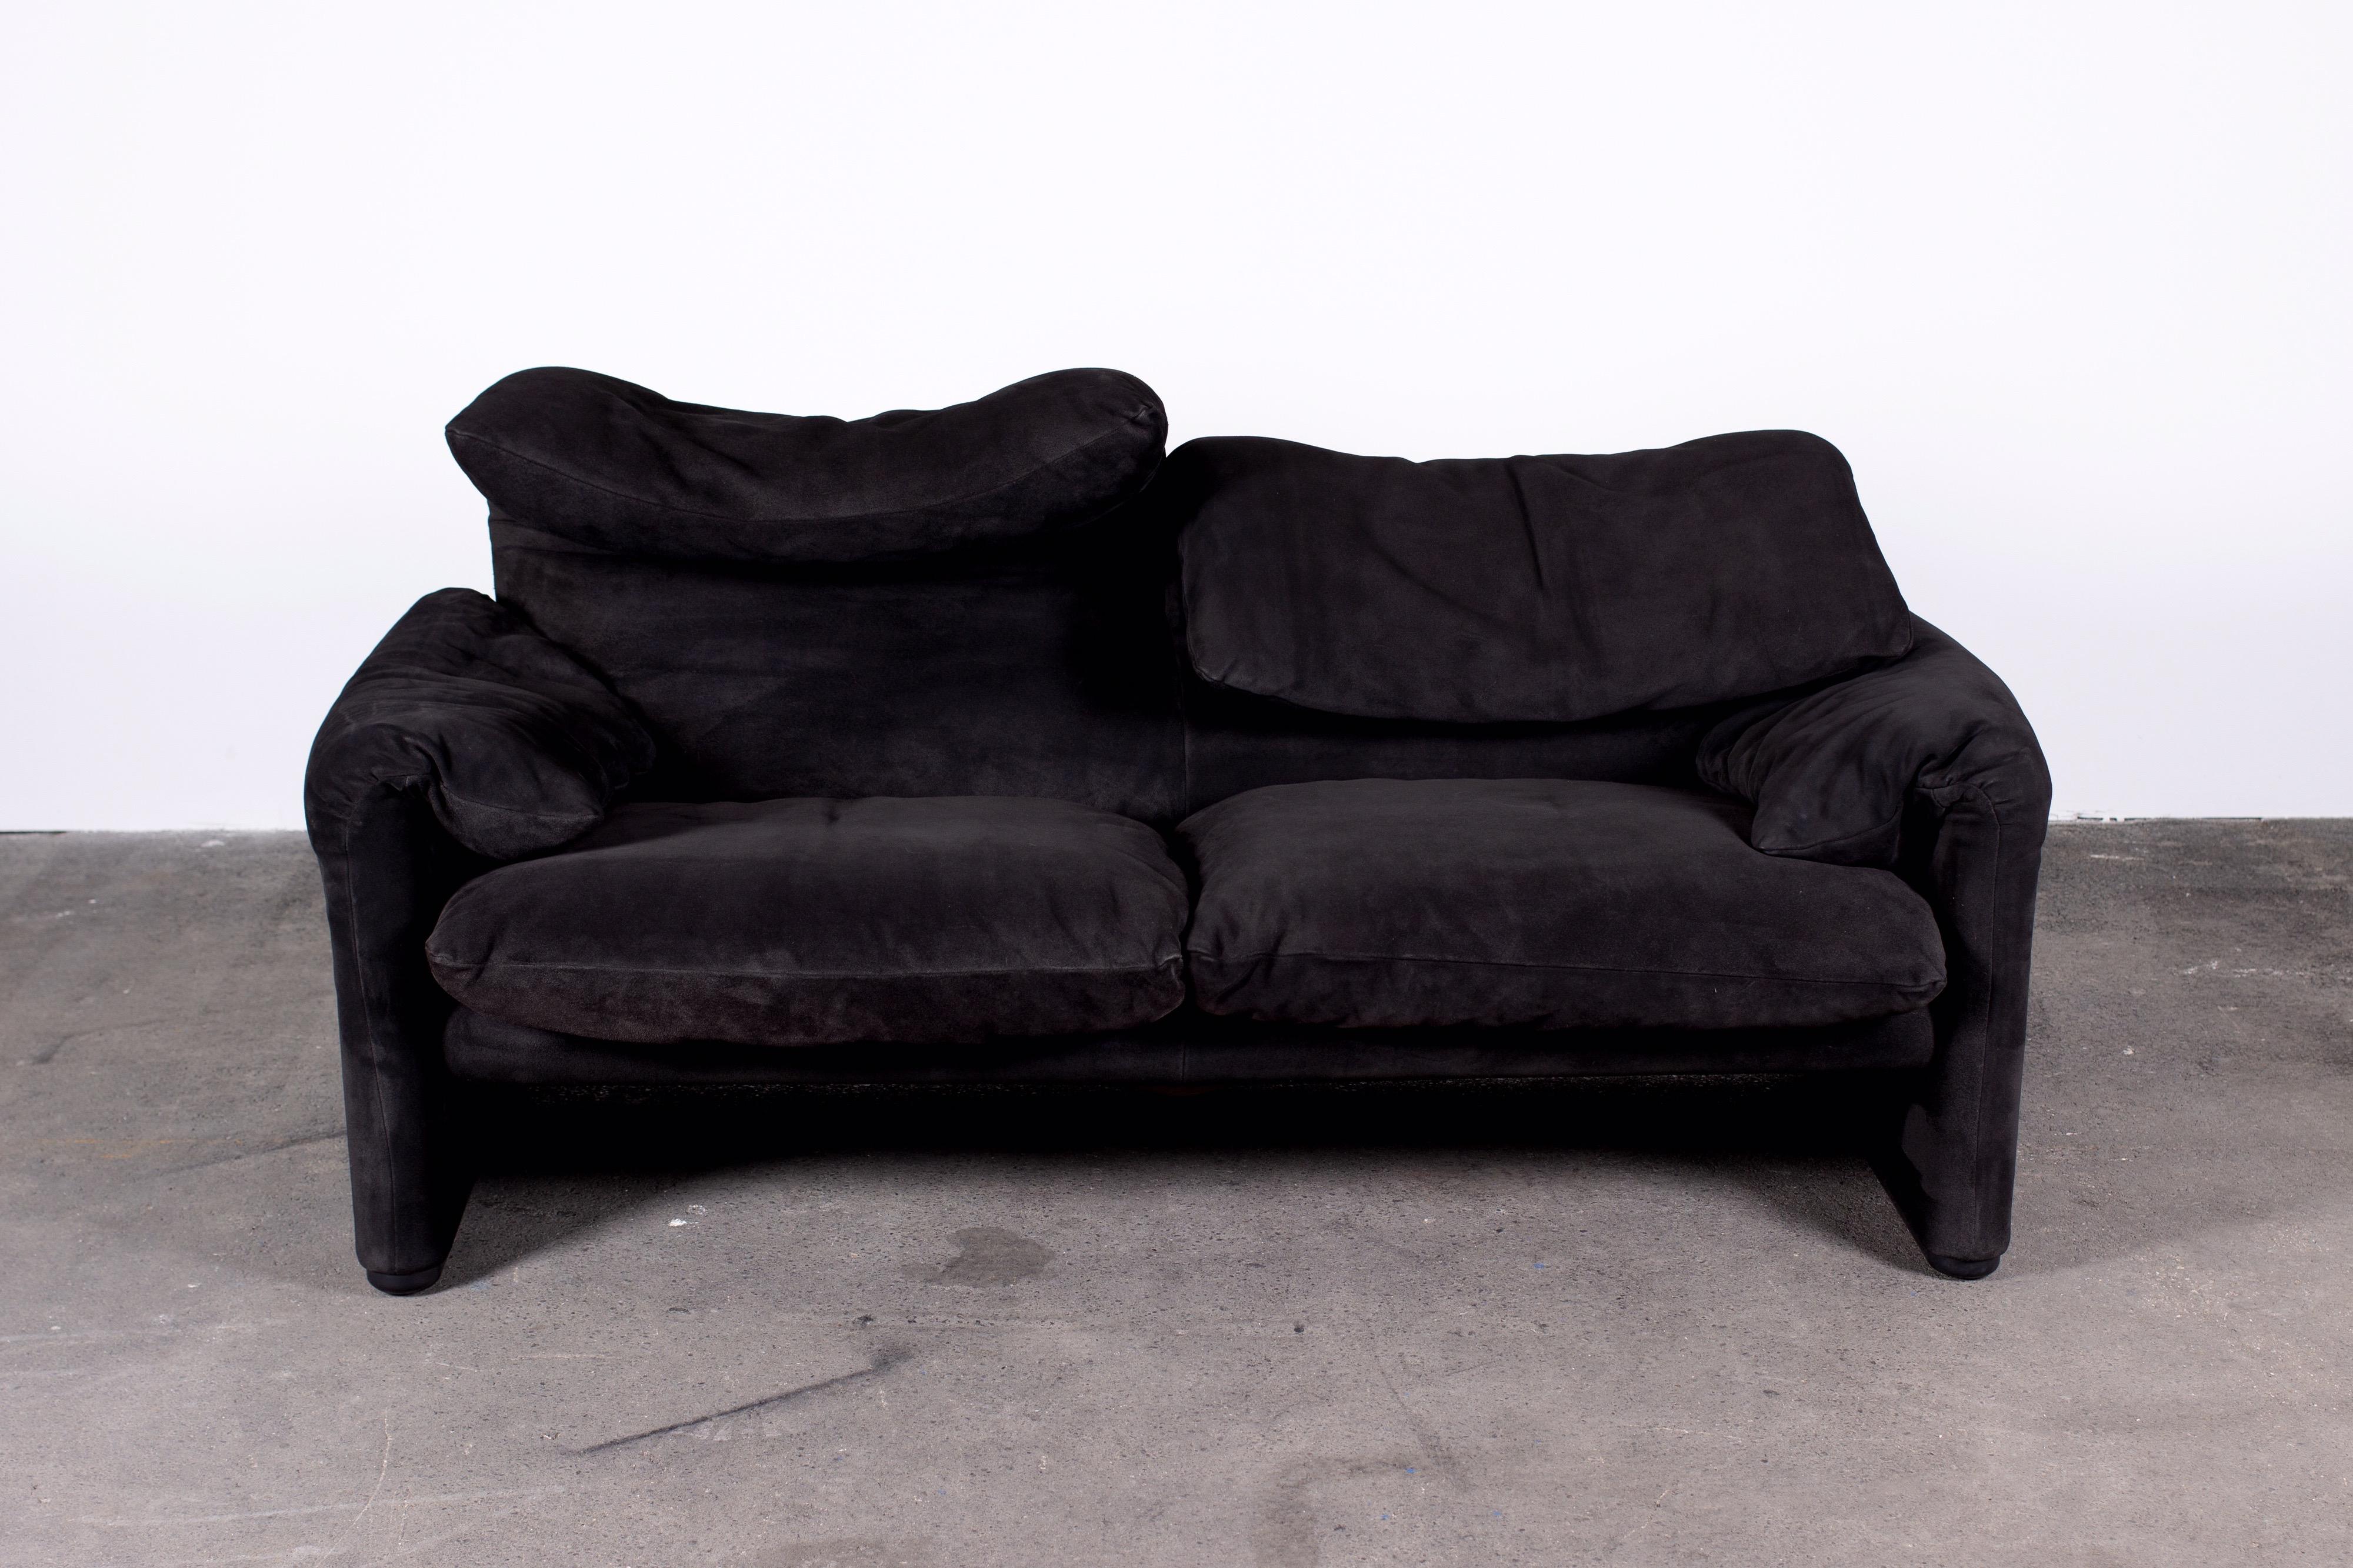 Pair of Black Suede 2-Seater Maralunga Sofas by Vico Magistretti for Cassina 5